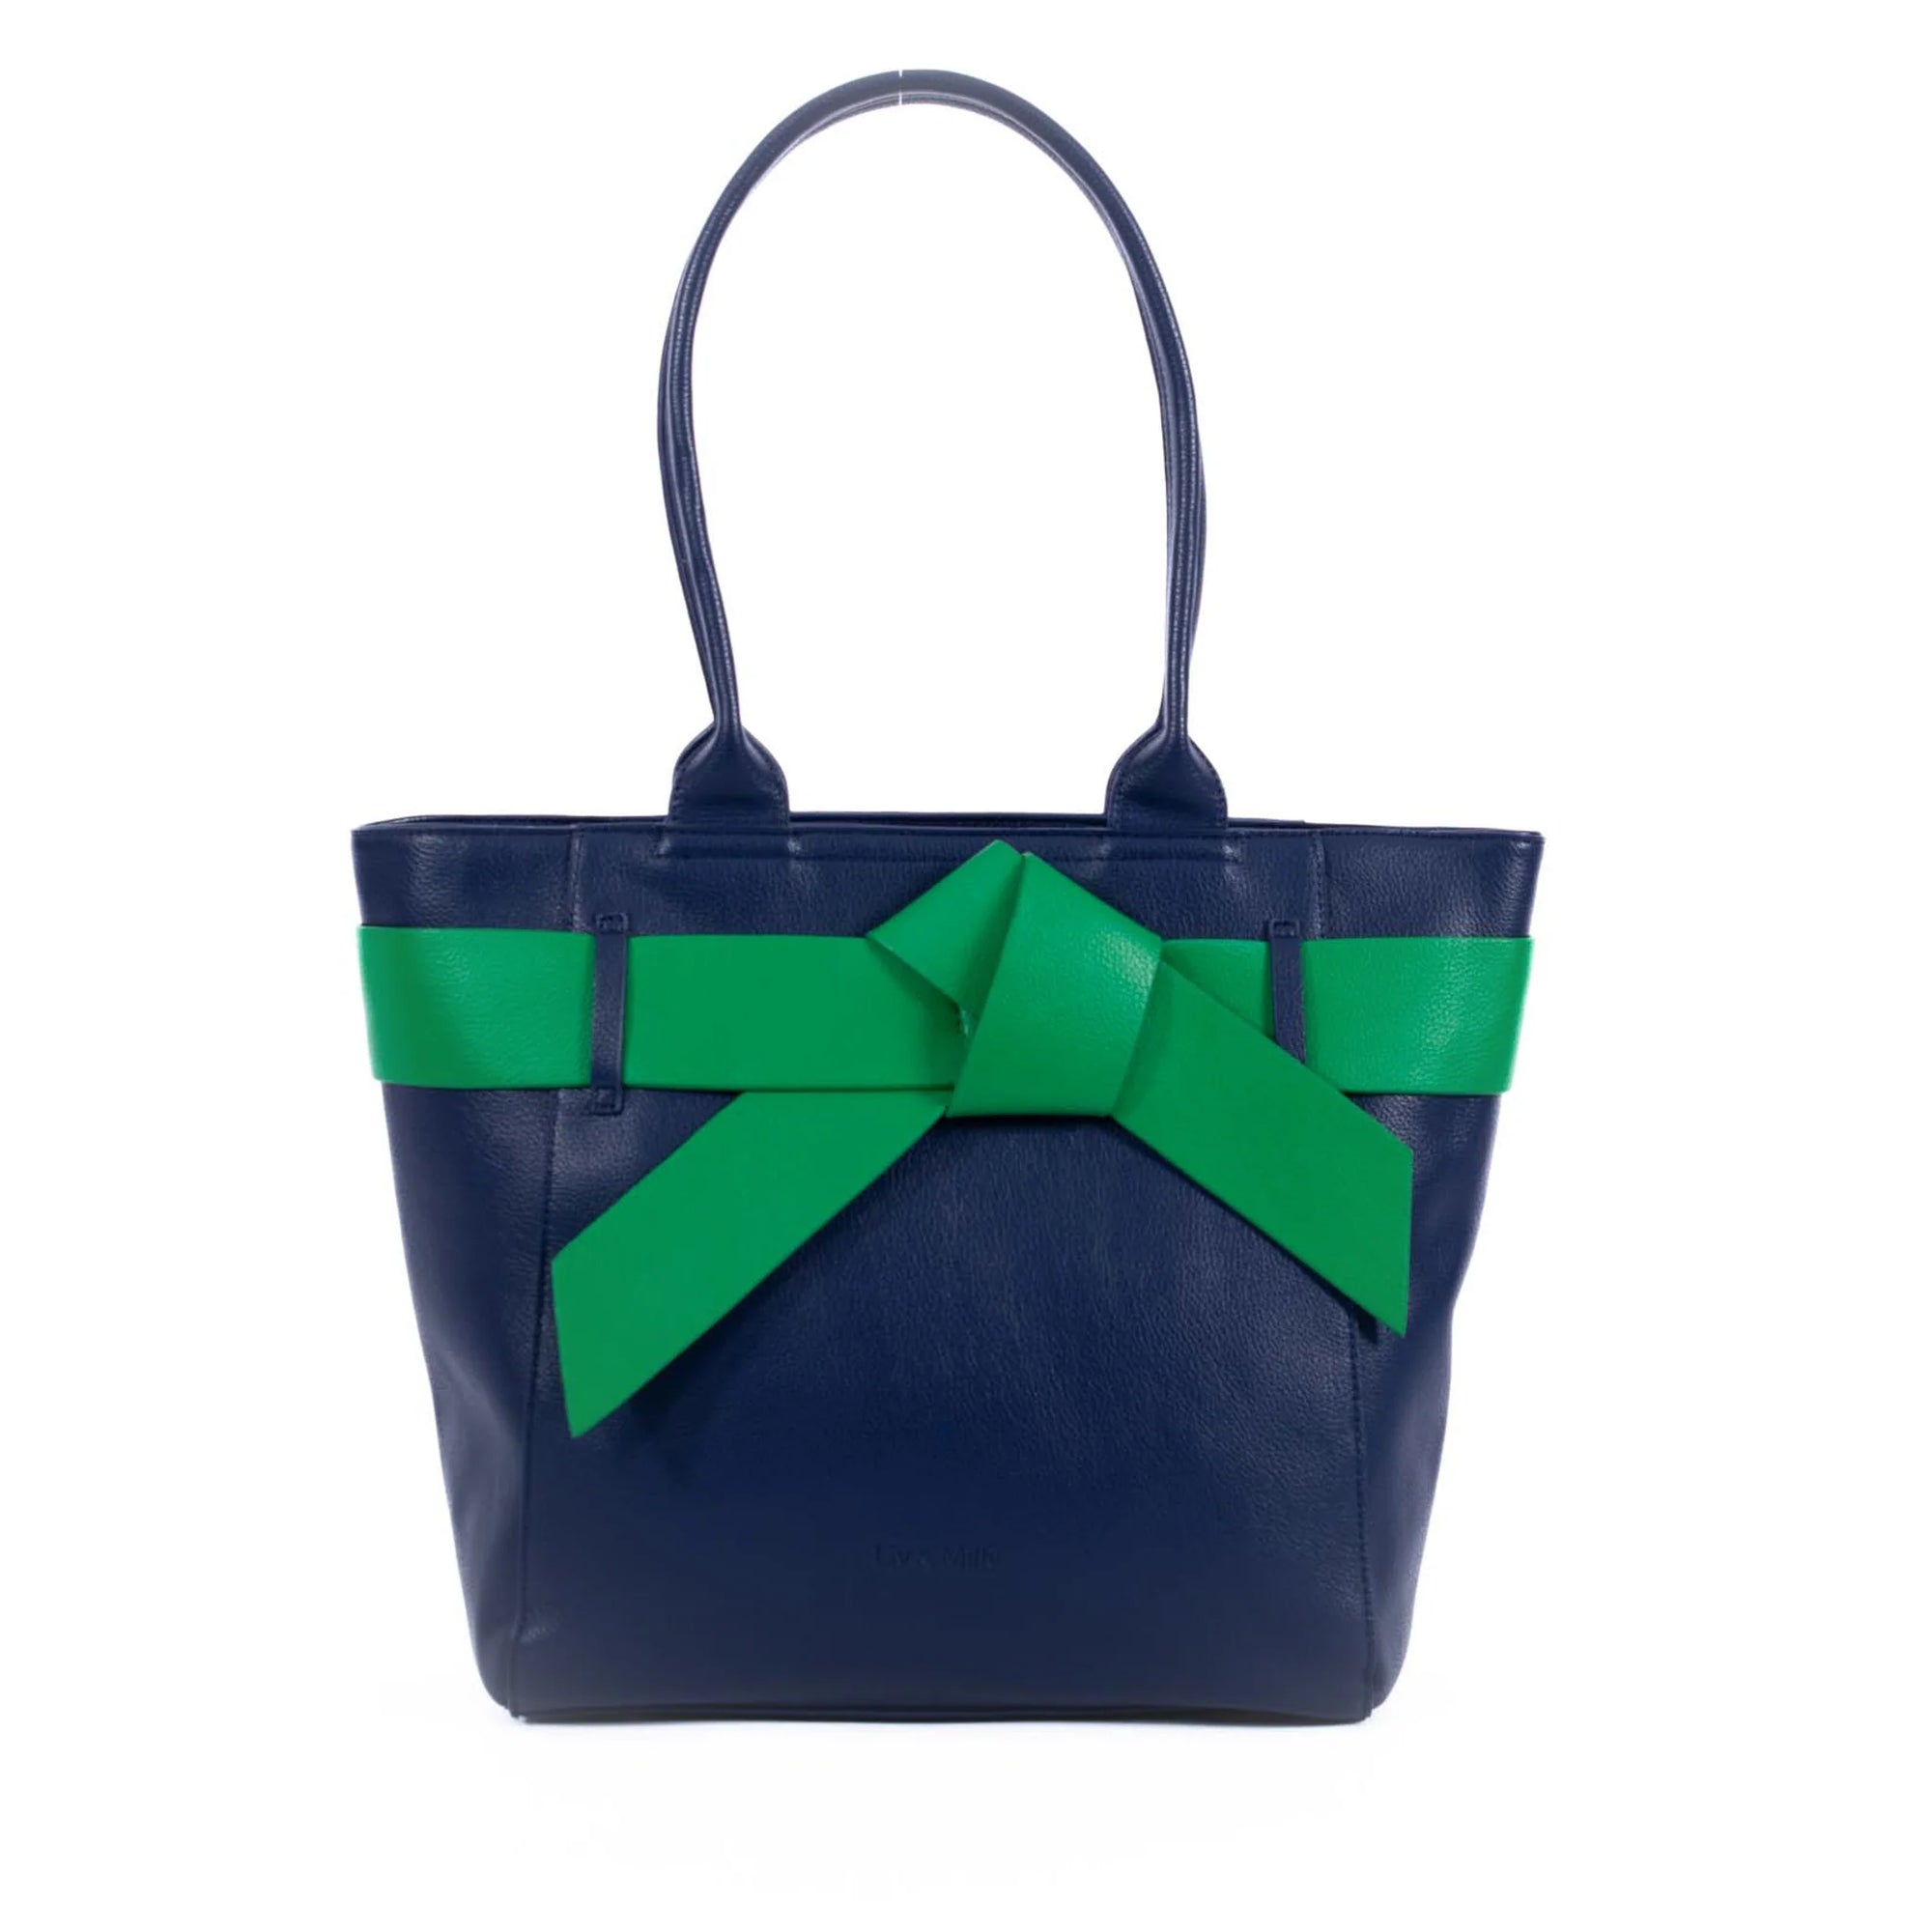 Mill & Hide - Liv & Milly - Chloe - Navy with Green Bow